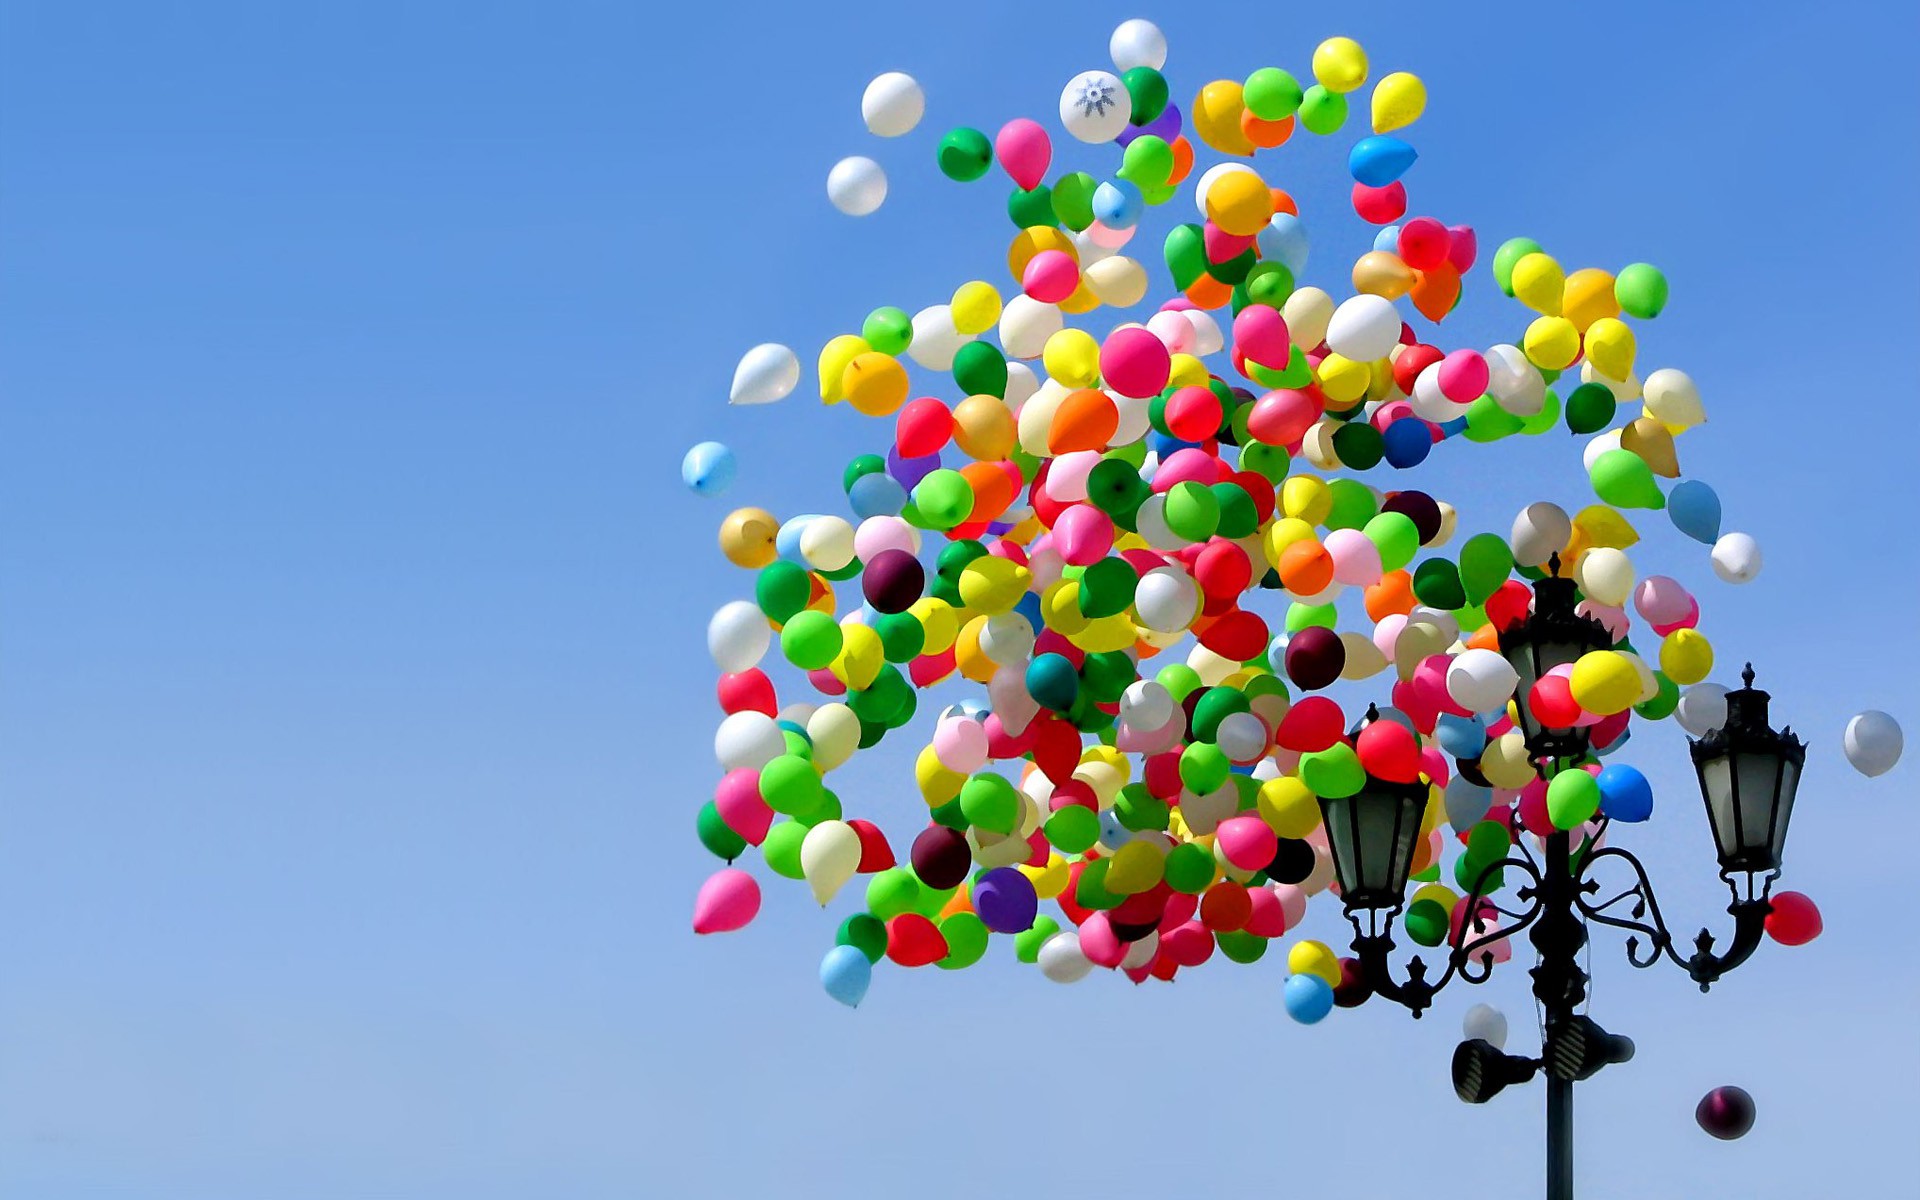 free-hd-3d-balloons-photography-wallpapers-download-hd 3d wallpapers download